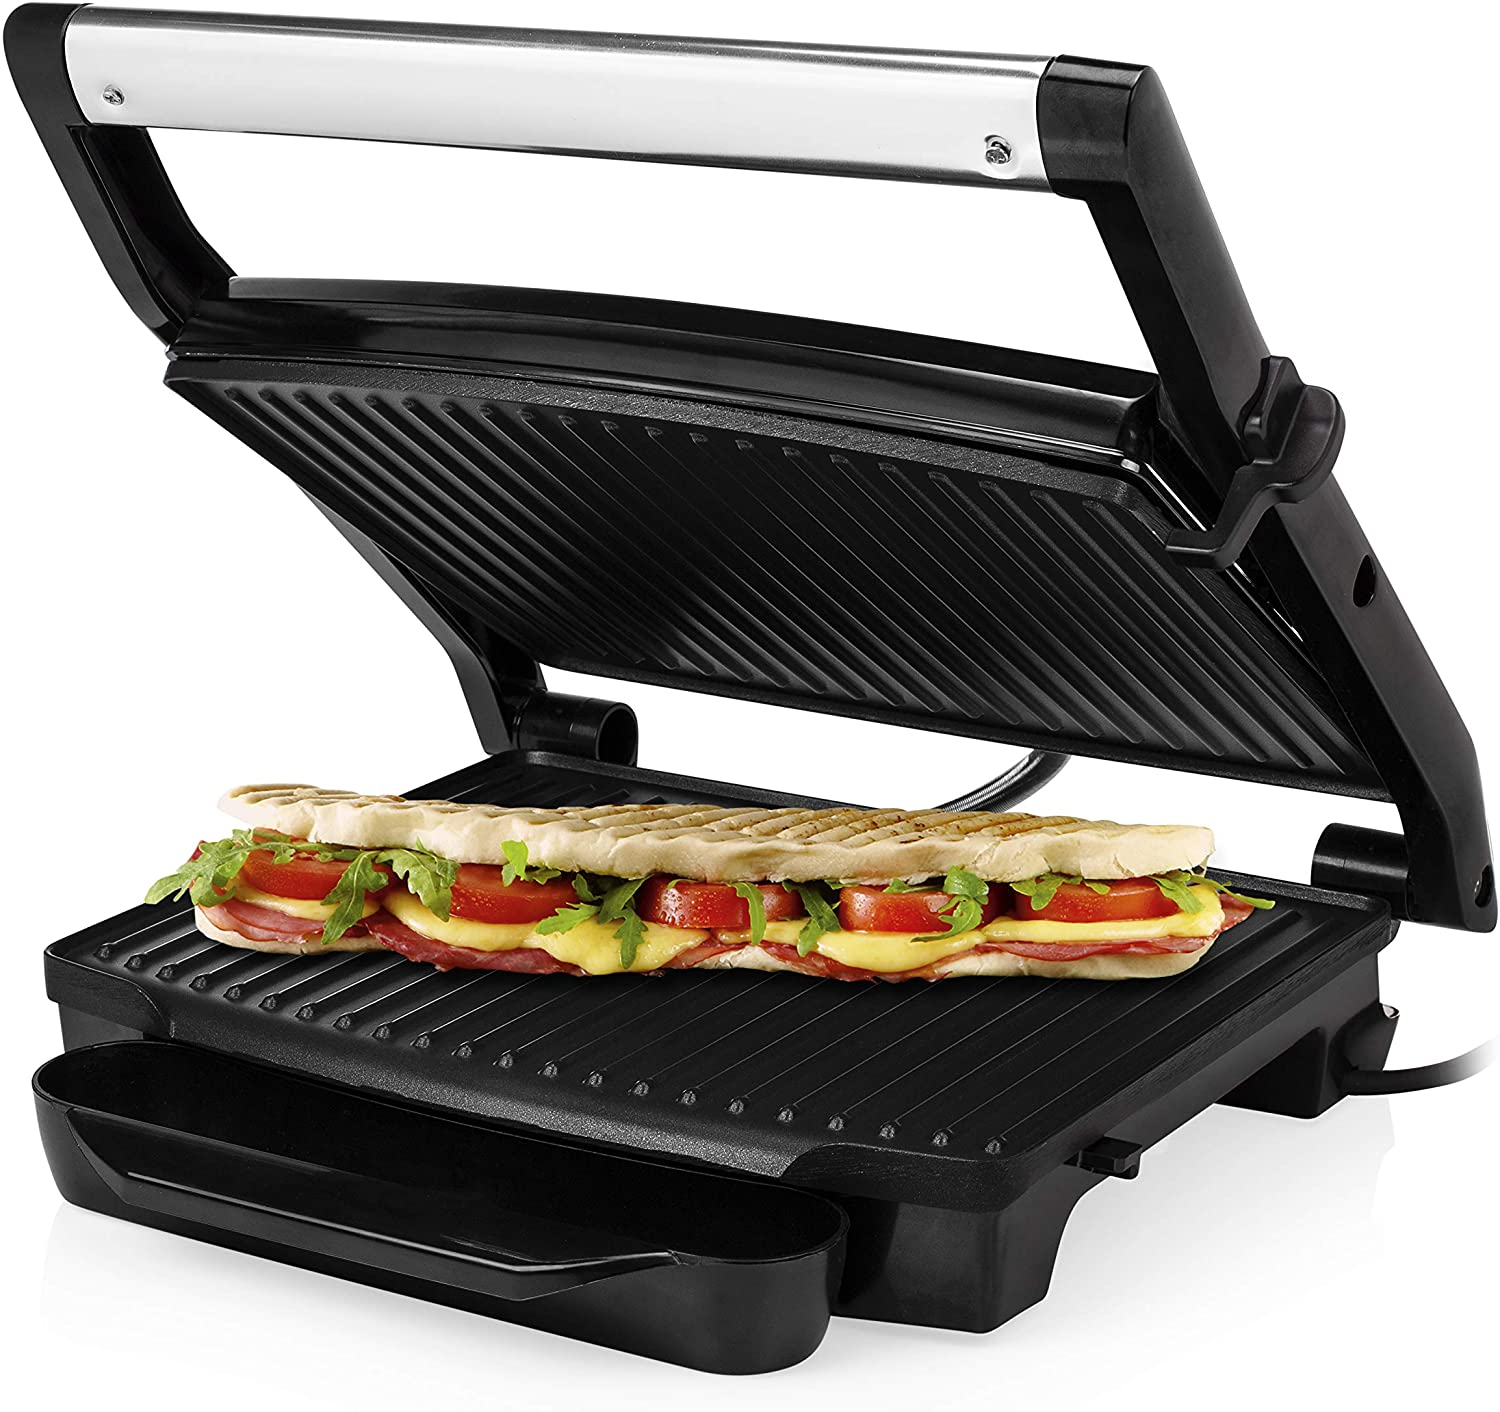 Princess Contact grill - Panini grill with stainless steel guide, 2000 watts, 0.75 m cable length, 30 x 24 cm grill surface, non-stick coating, 112415